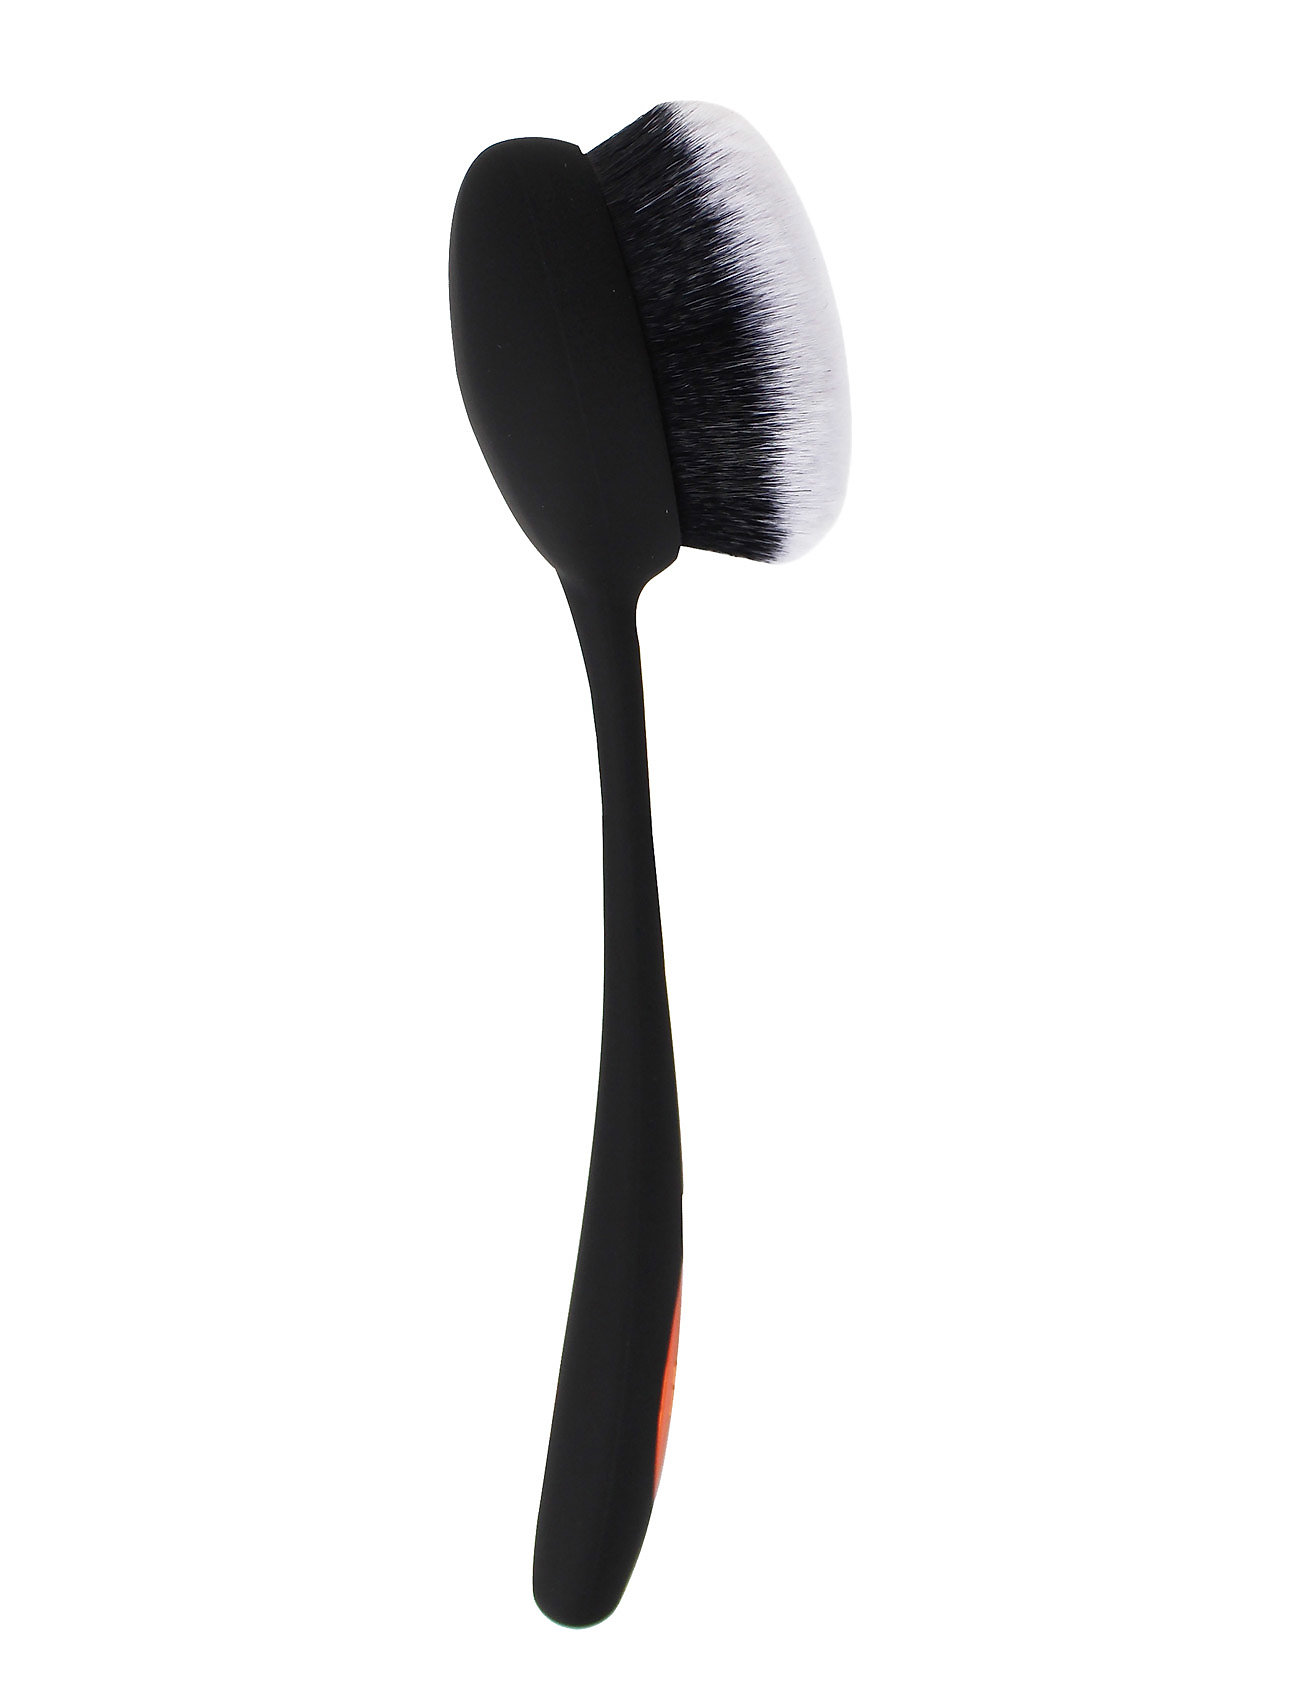 Blend & Blur Foundation Brush Beauty WOMEN Makeup Makeup Brushes Face Brushes Musta Real Techniques